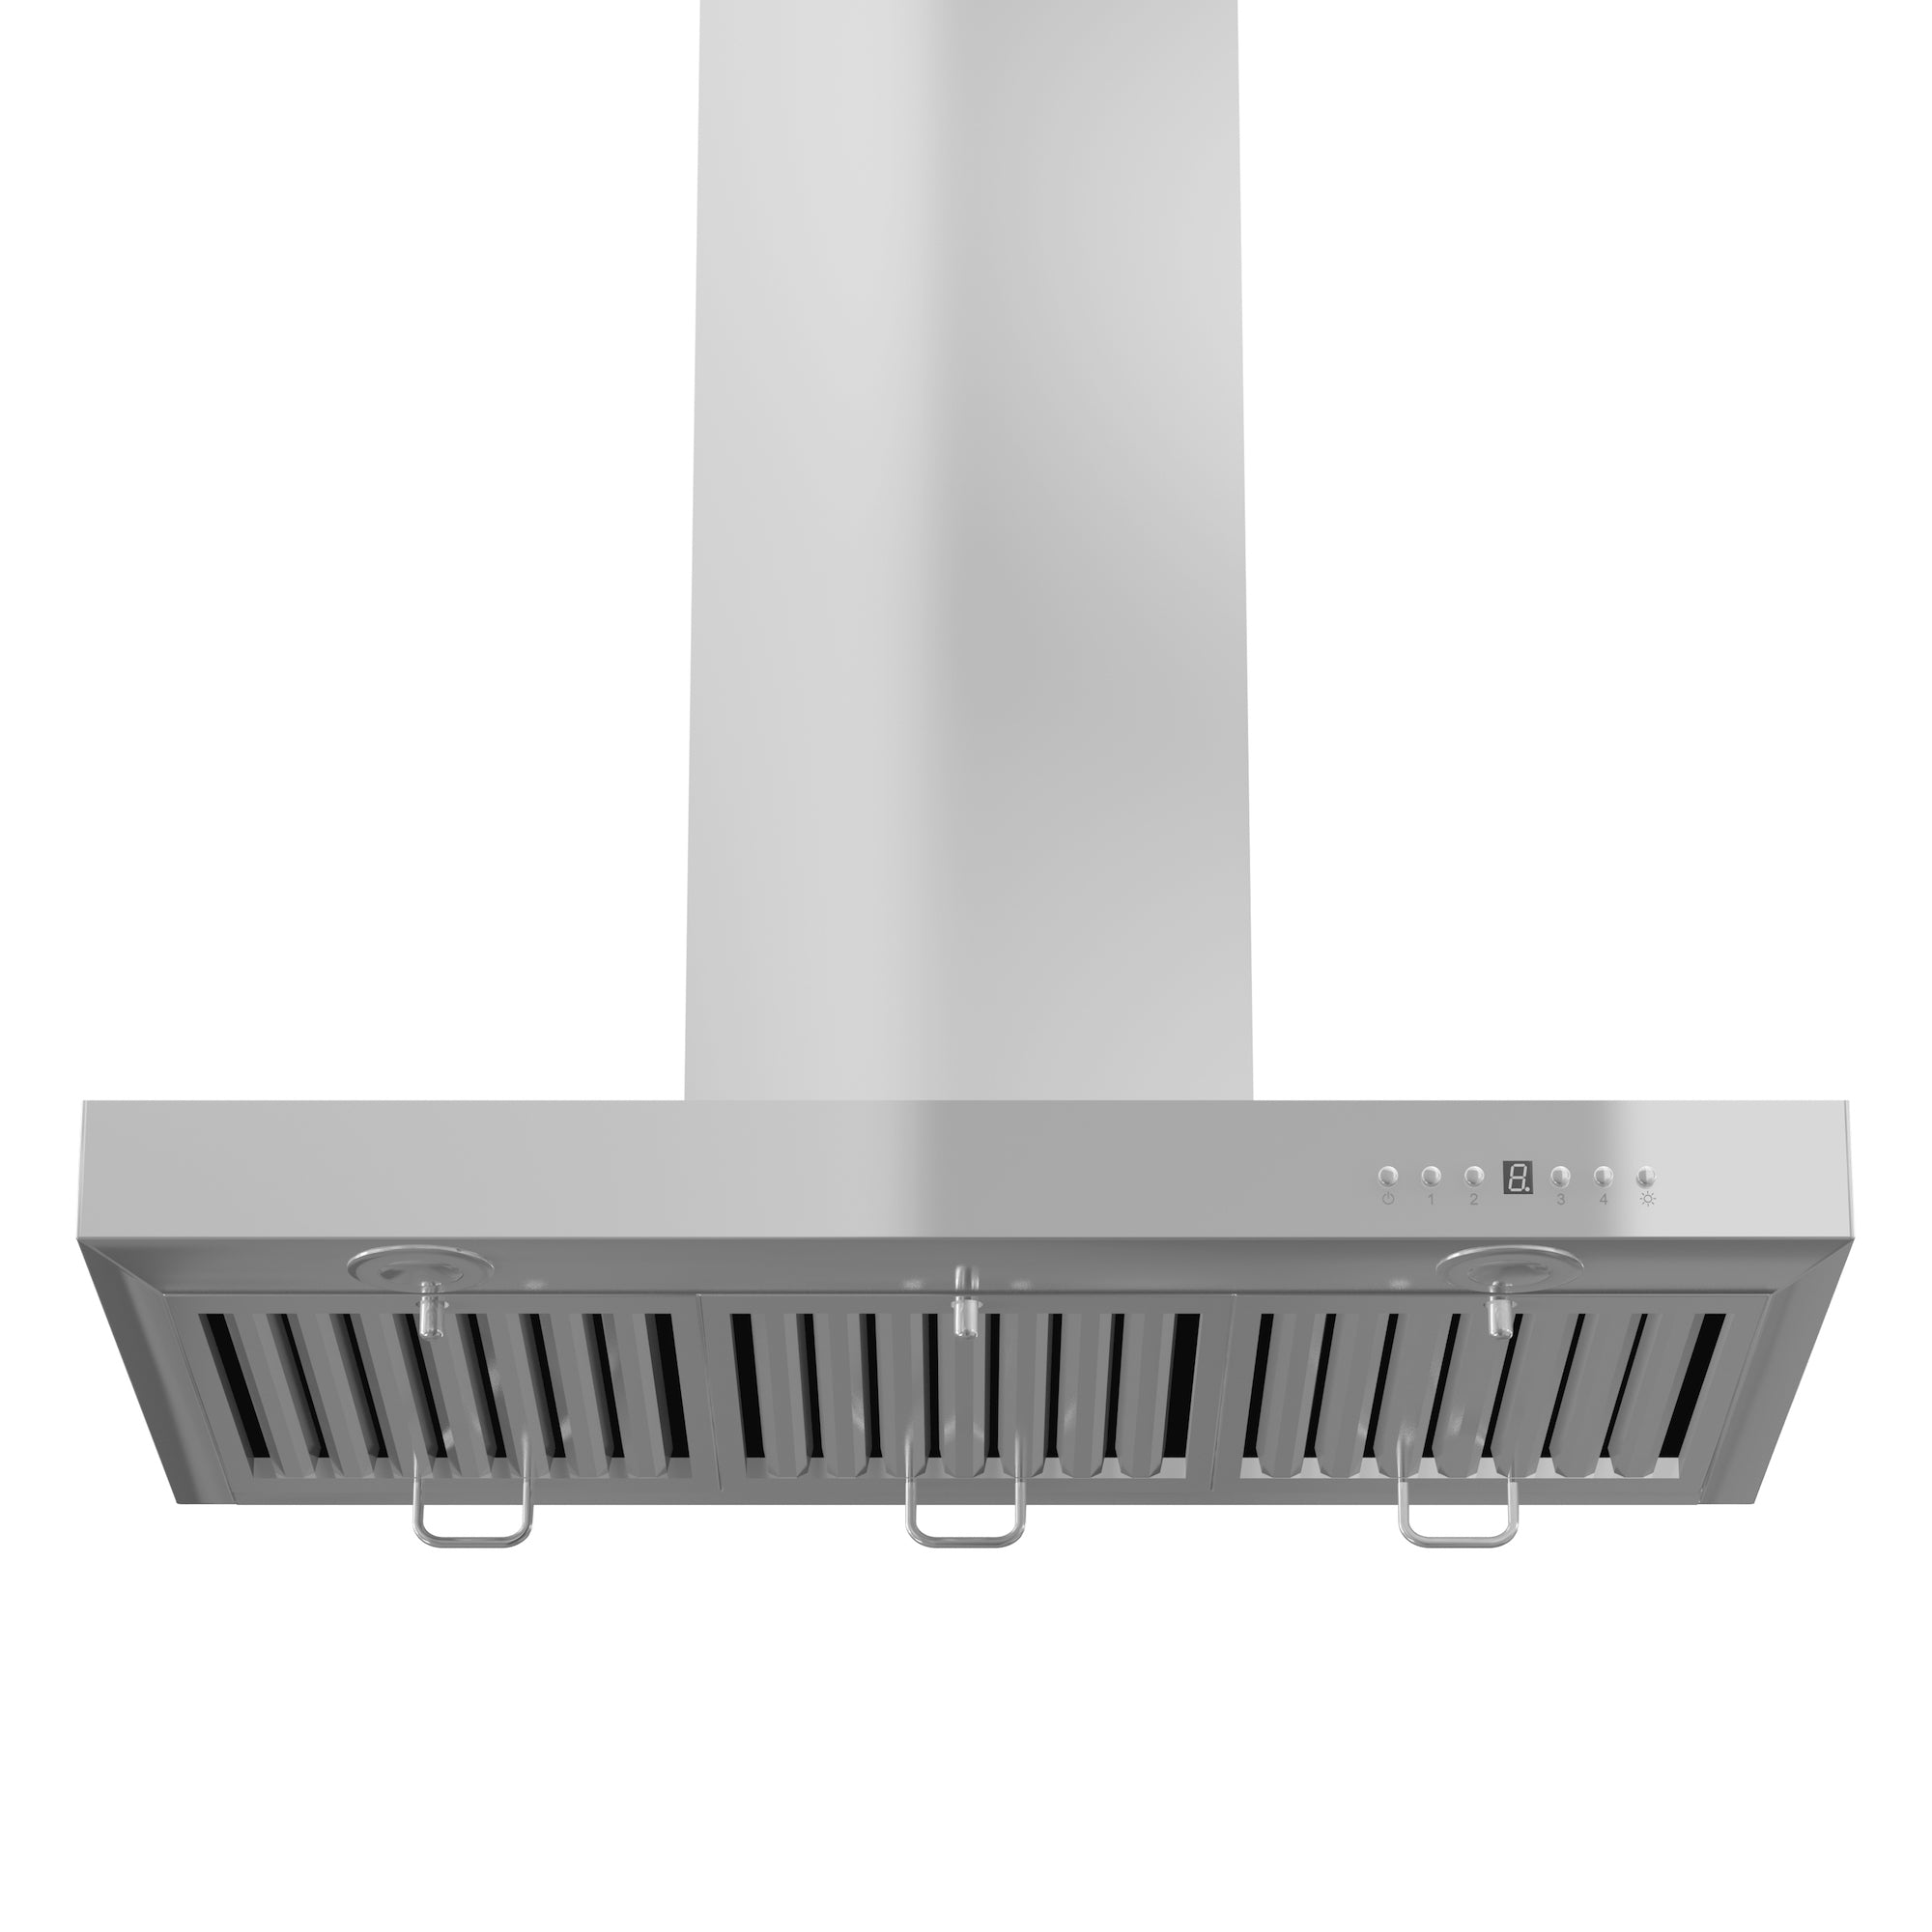 ZLINE 36" Convertible Vent Wall Mount Range Hood in Stainless Steel with Crown Molding (KECRN-36)